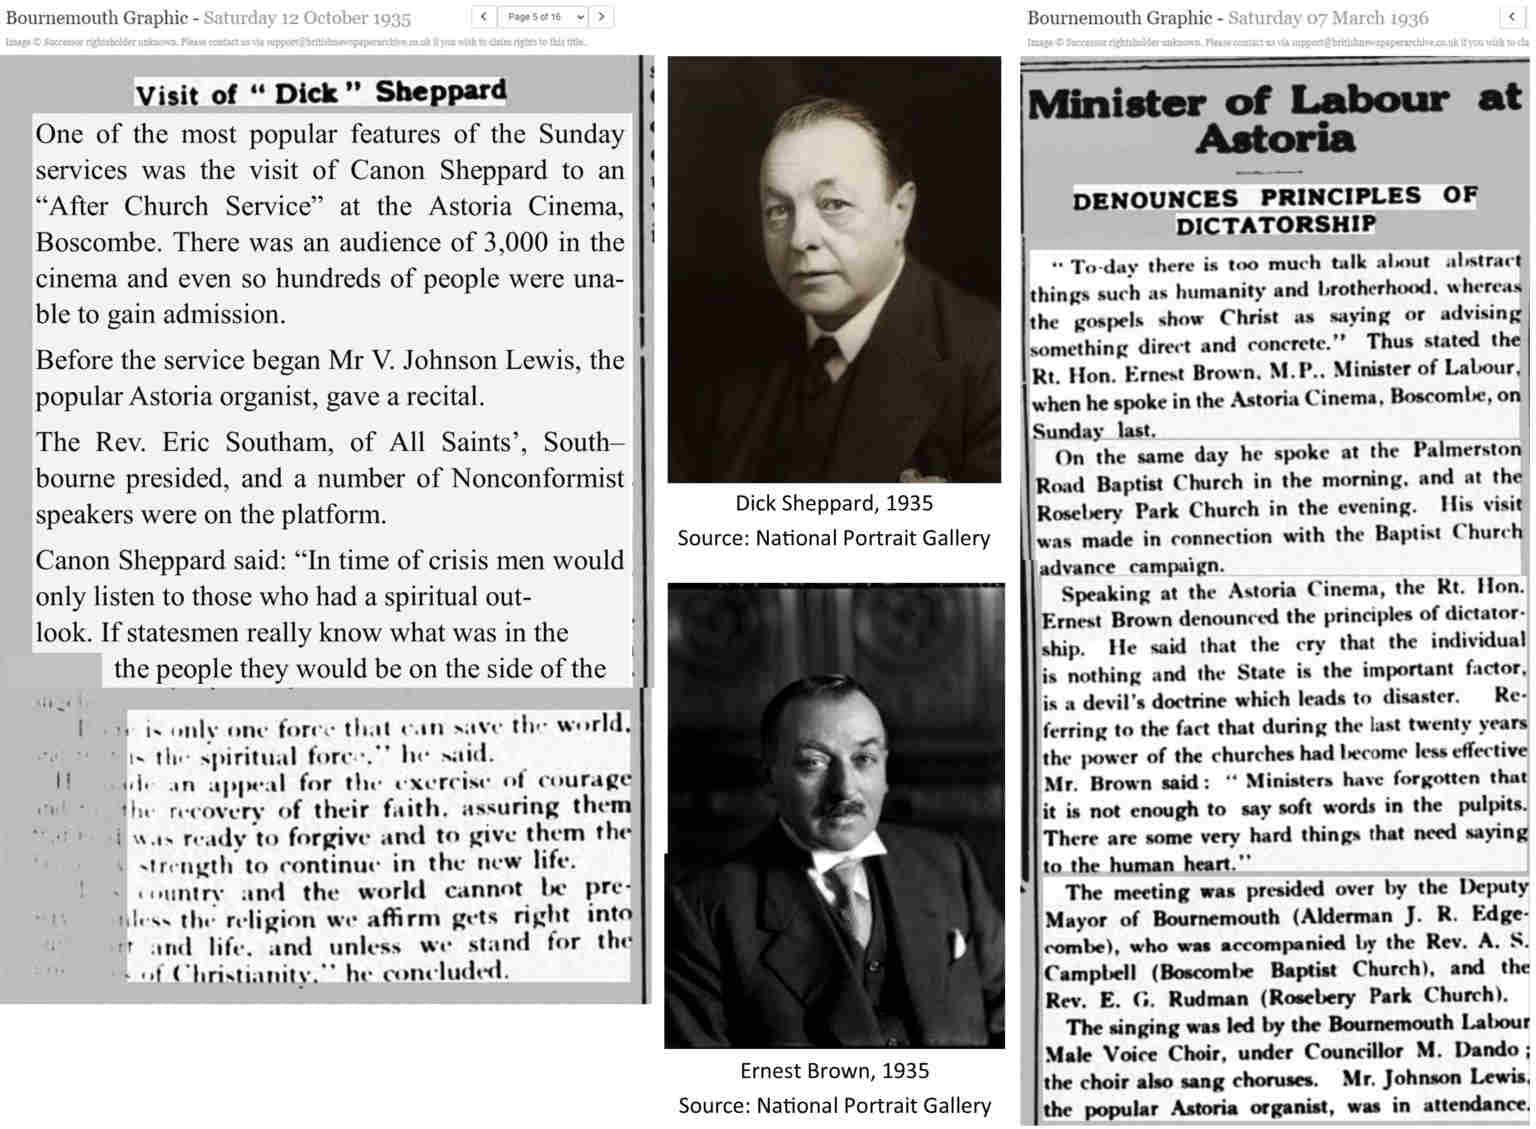 Two newspaper articles from the Bournemouth Graphic, 1935 and 1936, about the visits of Dick Sheppard and Ernest Brown to the Astoria Cinema. In the middle of the two articles are a black and white photograph of each of them, middle aged white men in suits.